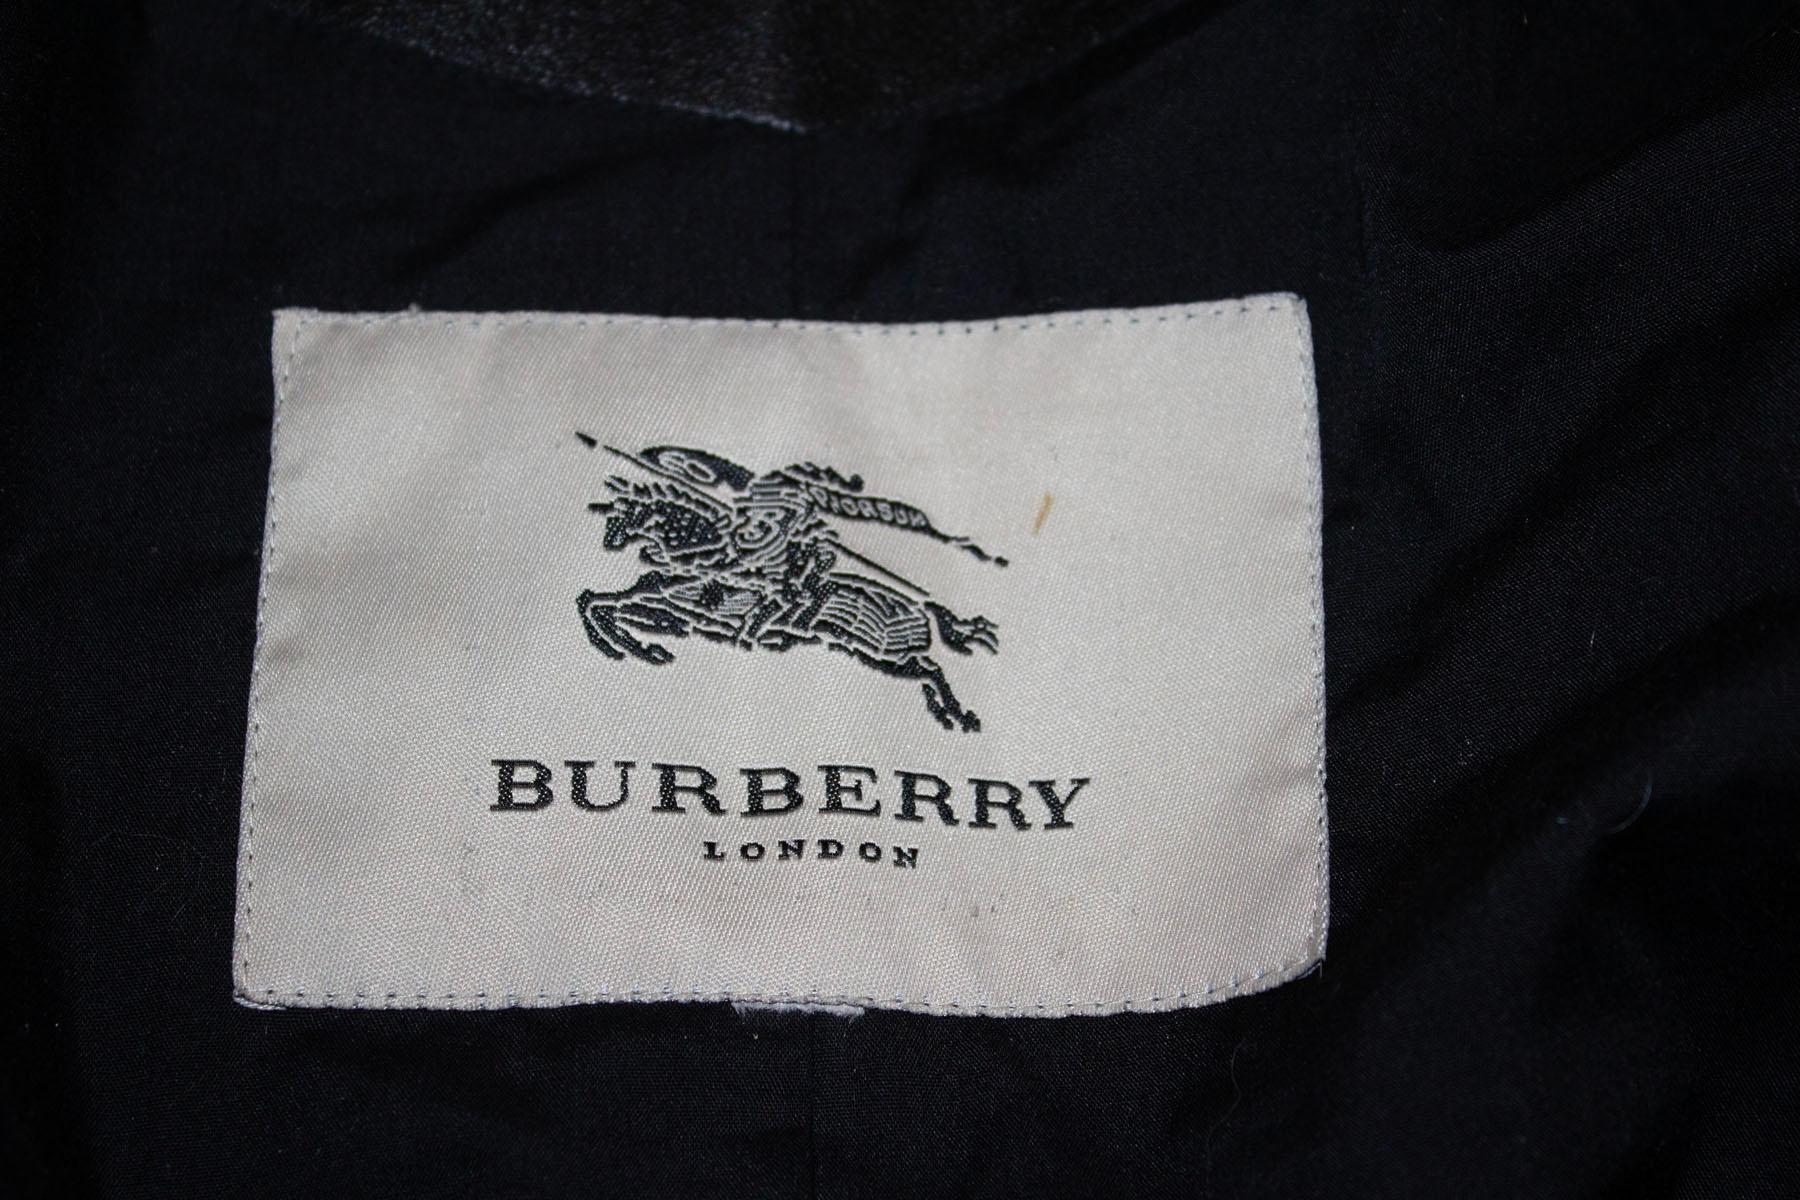 A wonderful black leather jacket by British firm Burberry. As you would expect the leather is of a wonderful quality. The jacket has a zip front opening and zip pockets. It has belt hoops at the base , epaulettes on the shoulder, zips at the wrist, 